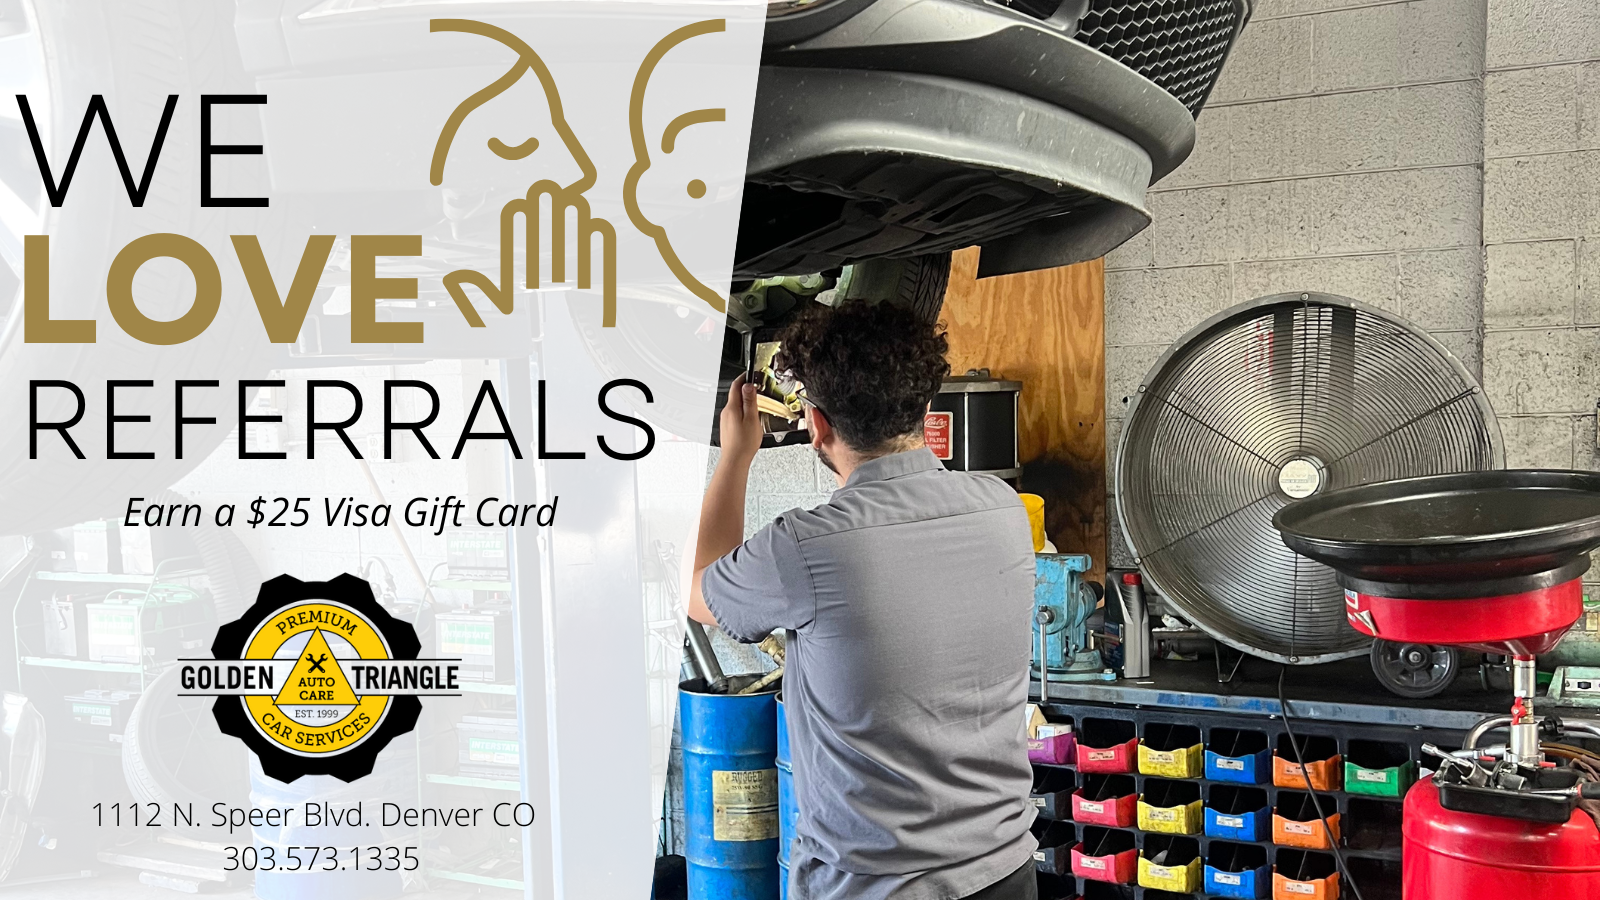 Golden Triangle Auto Care Offers $25 Visa Gift Card on Select Referrals